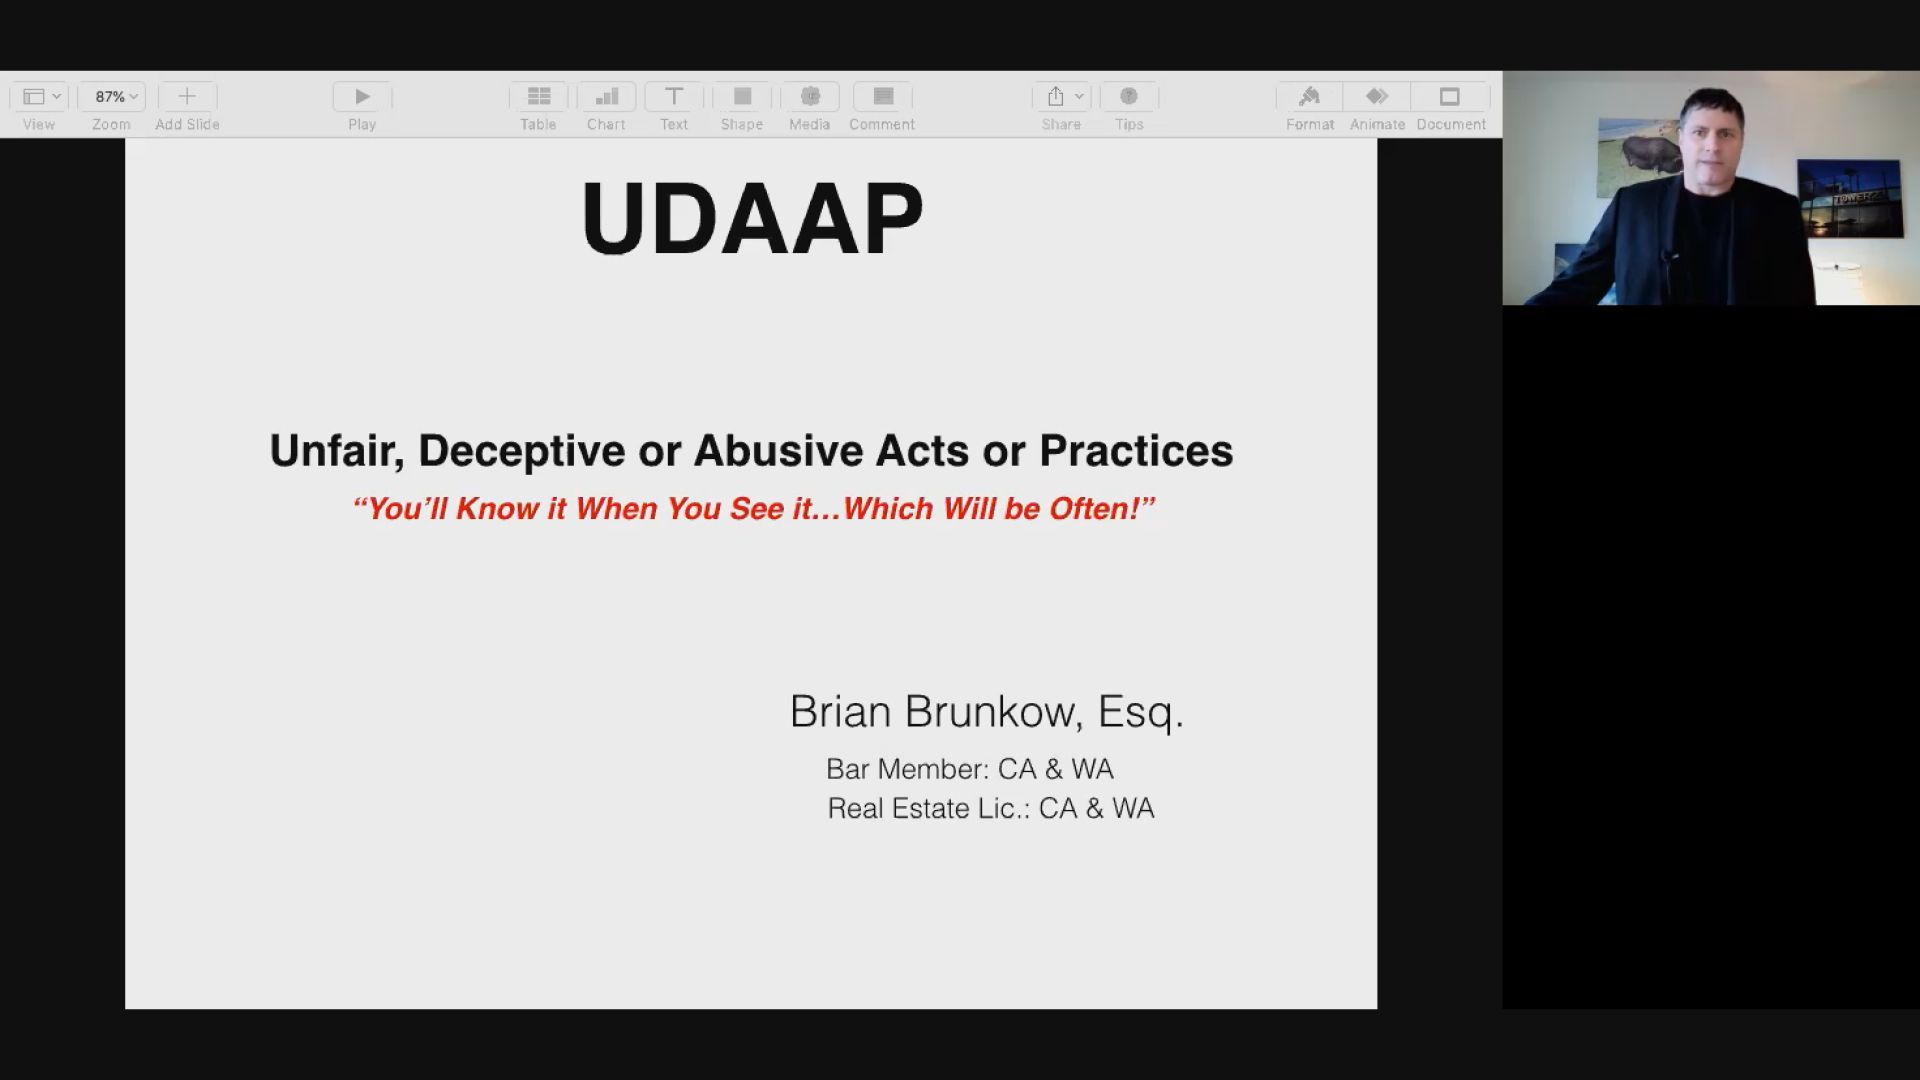 Unfair, Deceptive, or Abusive Acts or Practices: “I’ll Know It When I See It…” Thumbnail